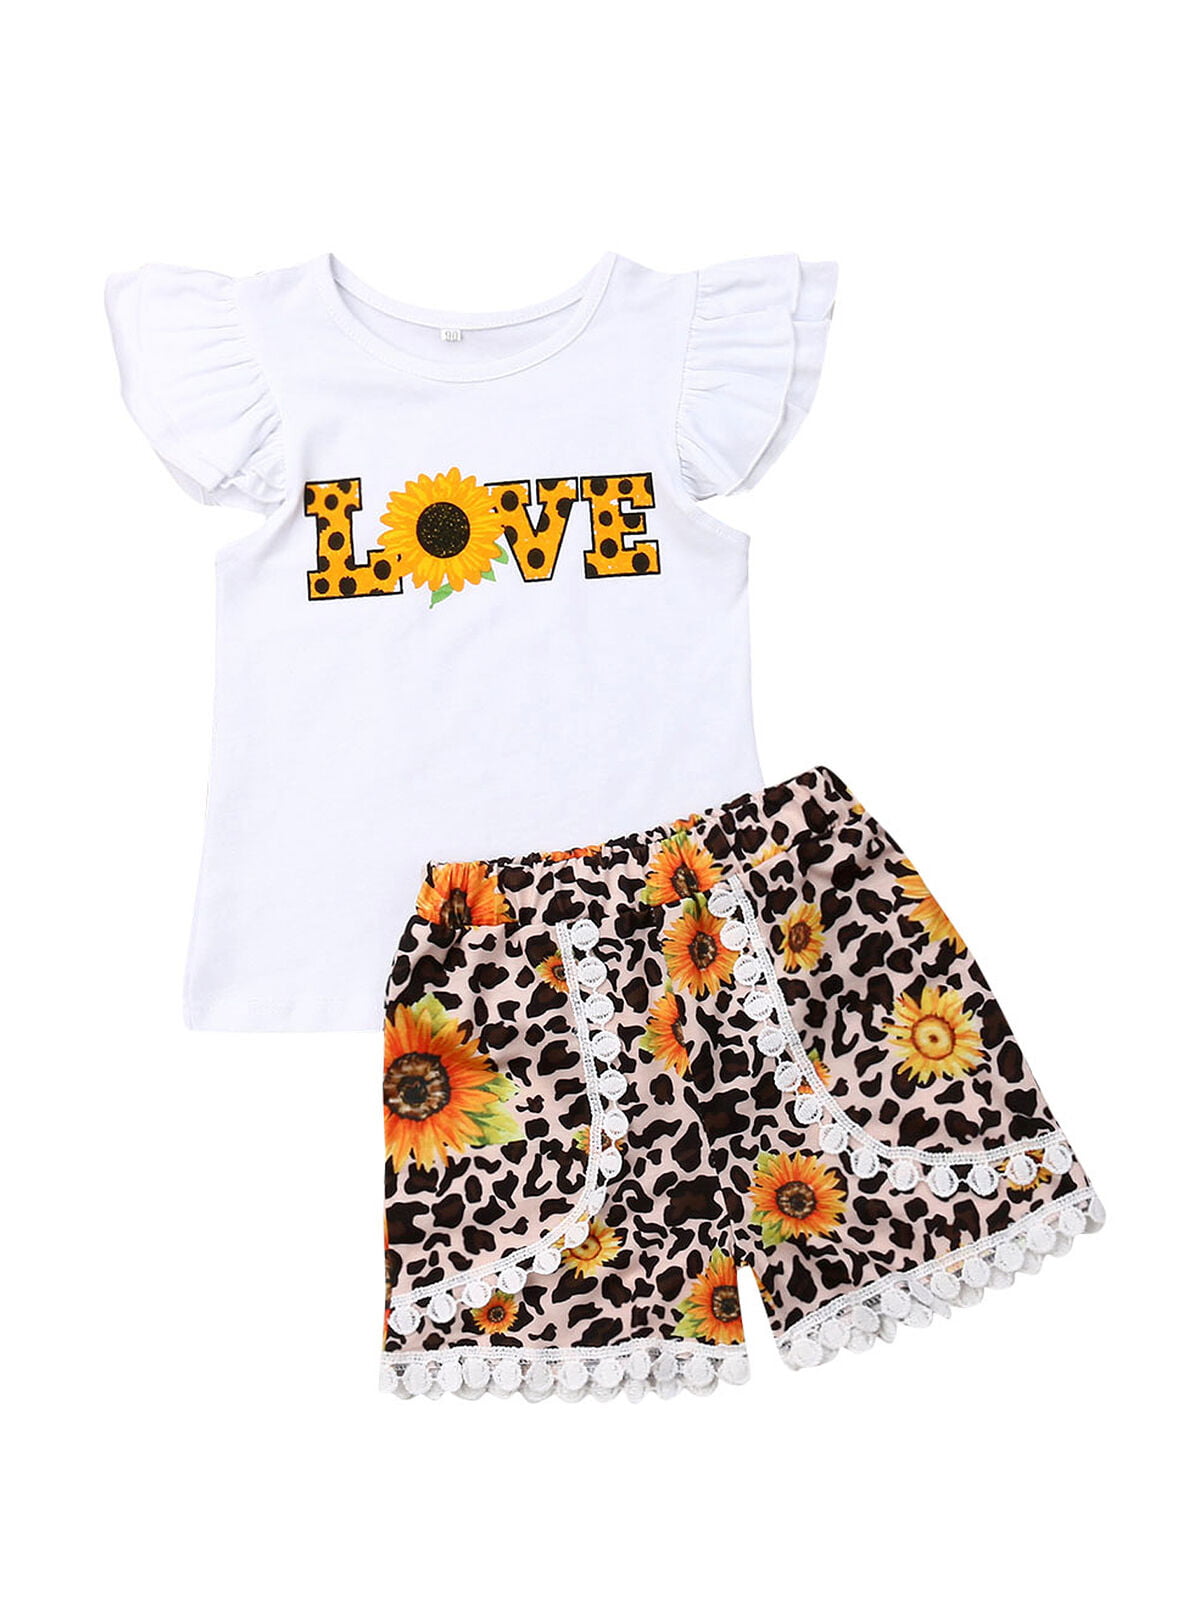 baby Girls clothes cotton summer Top vest short pants kids girl outfits 